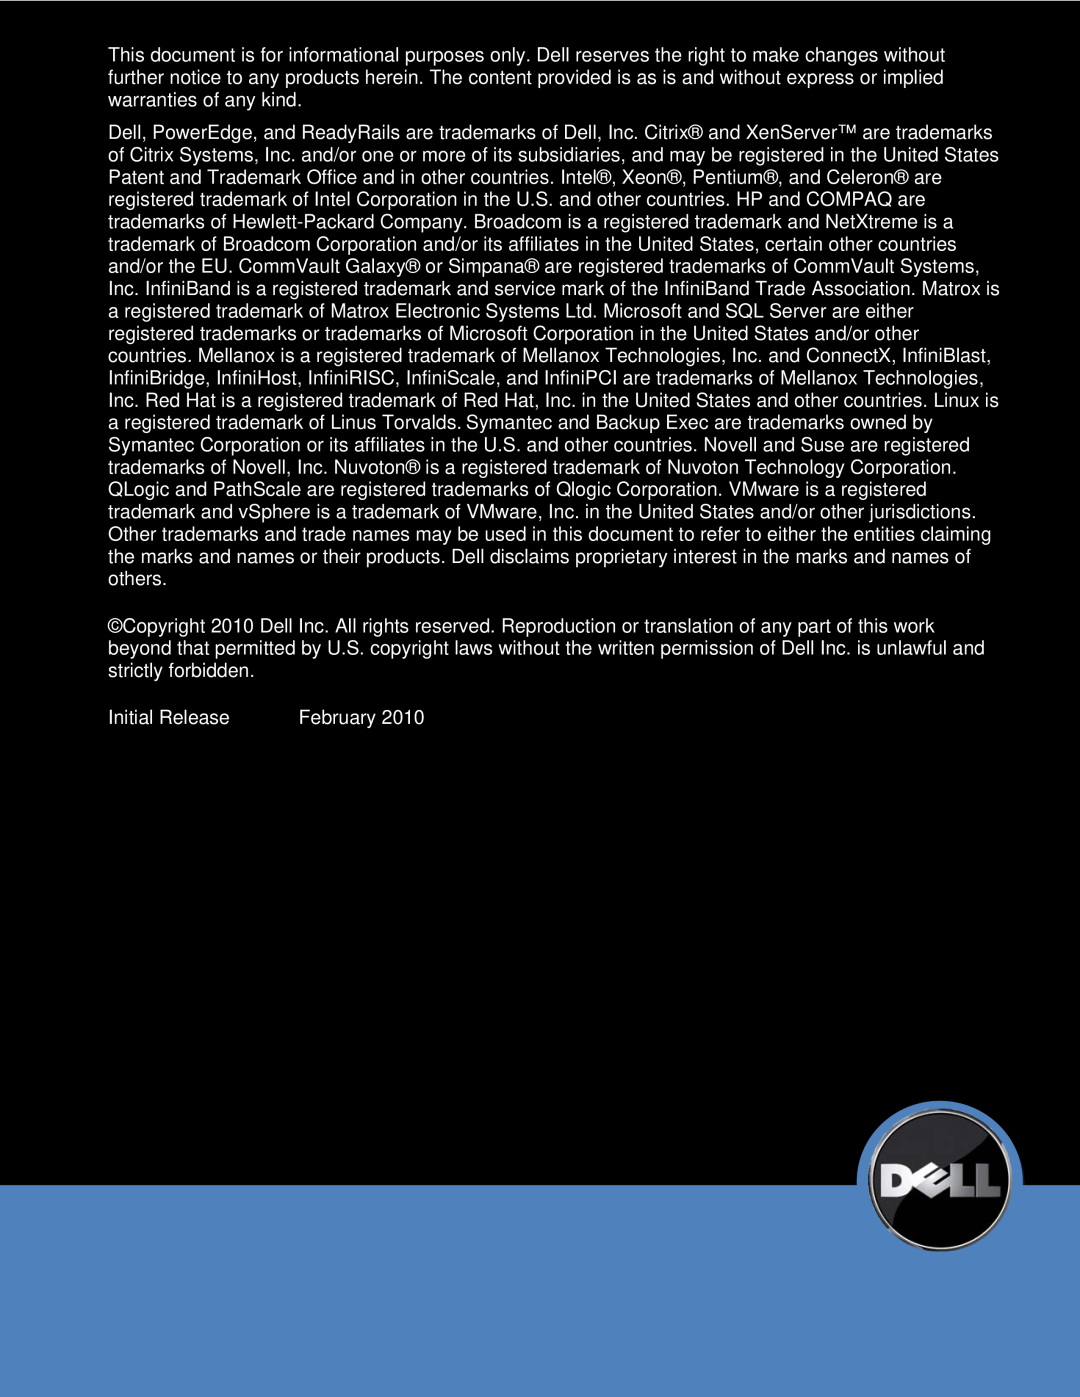 Dell T310 manual Initial Release, February 